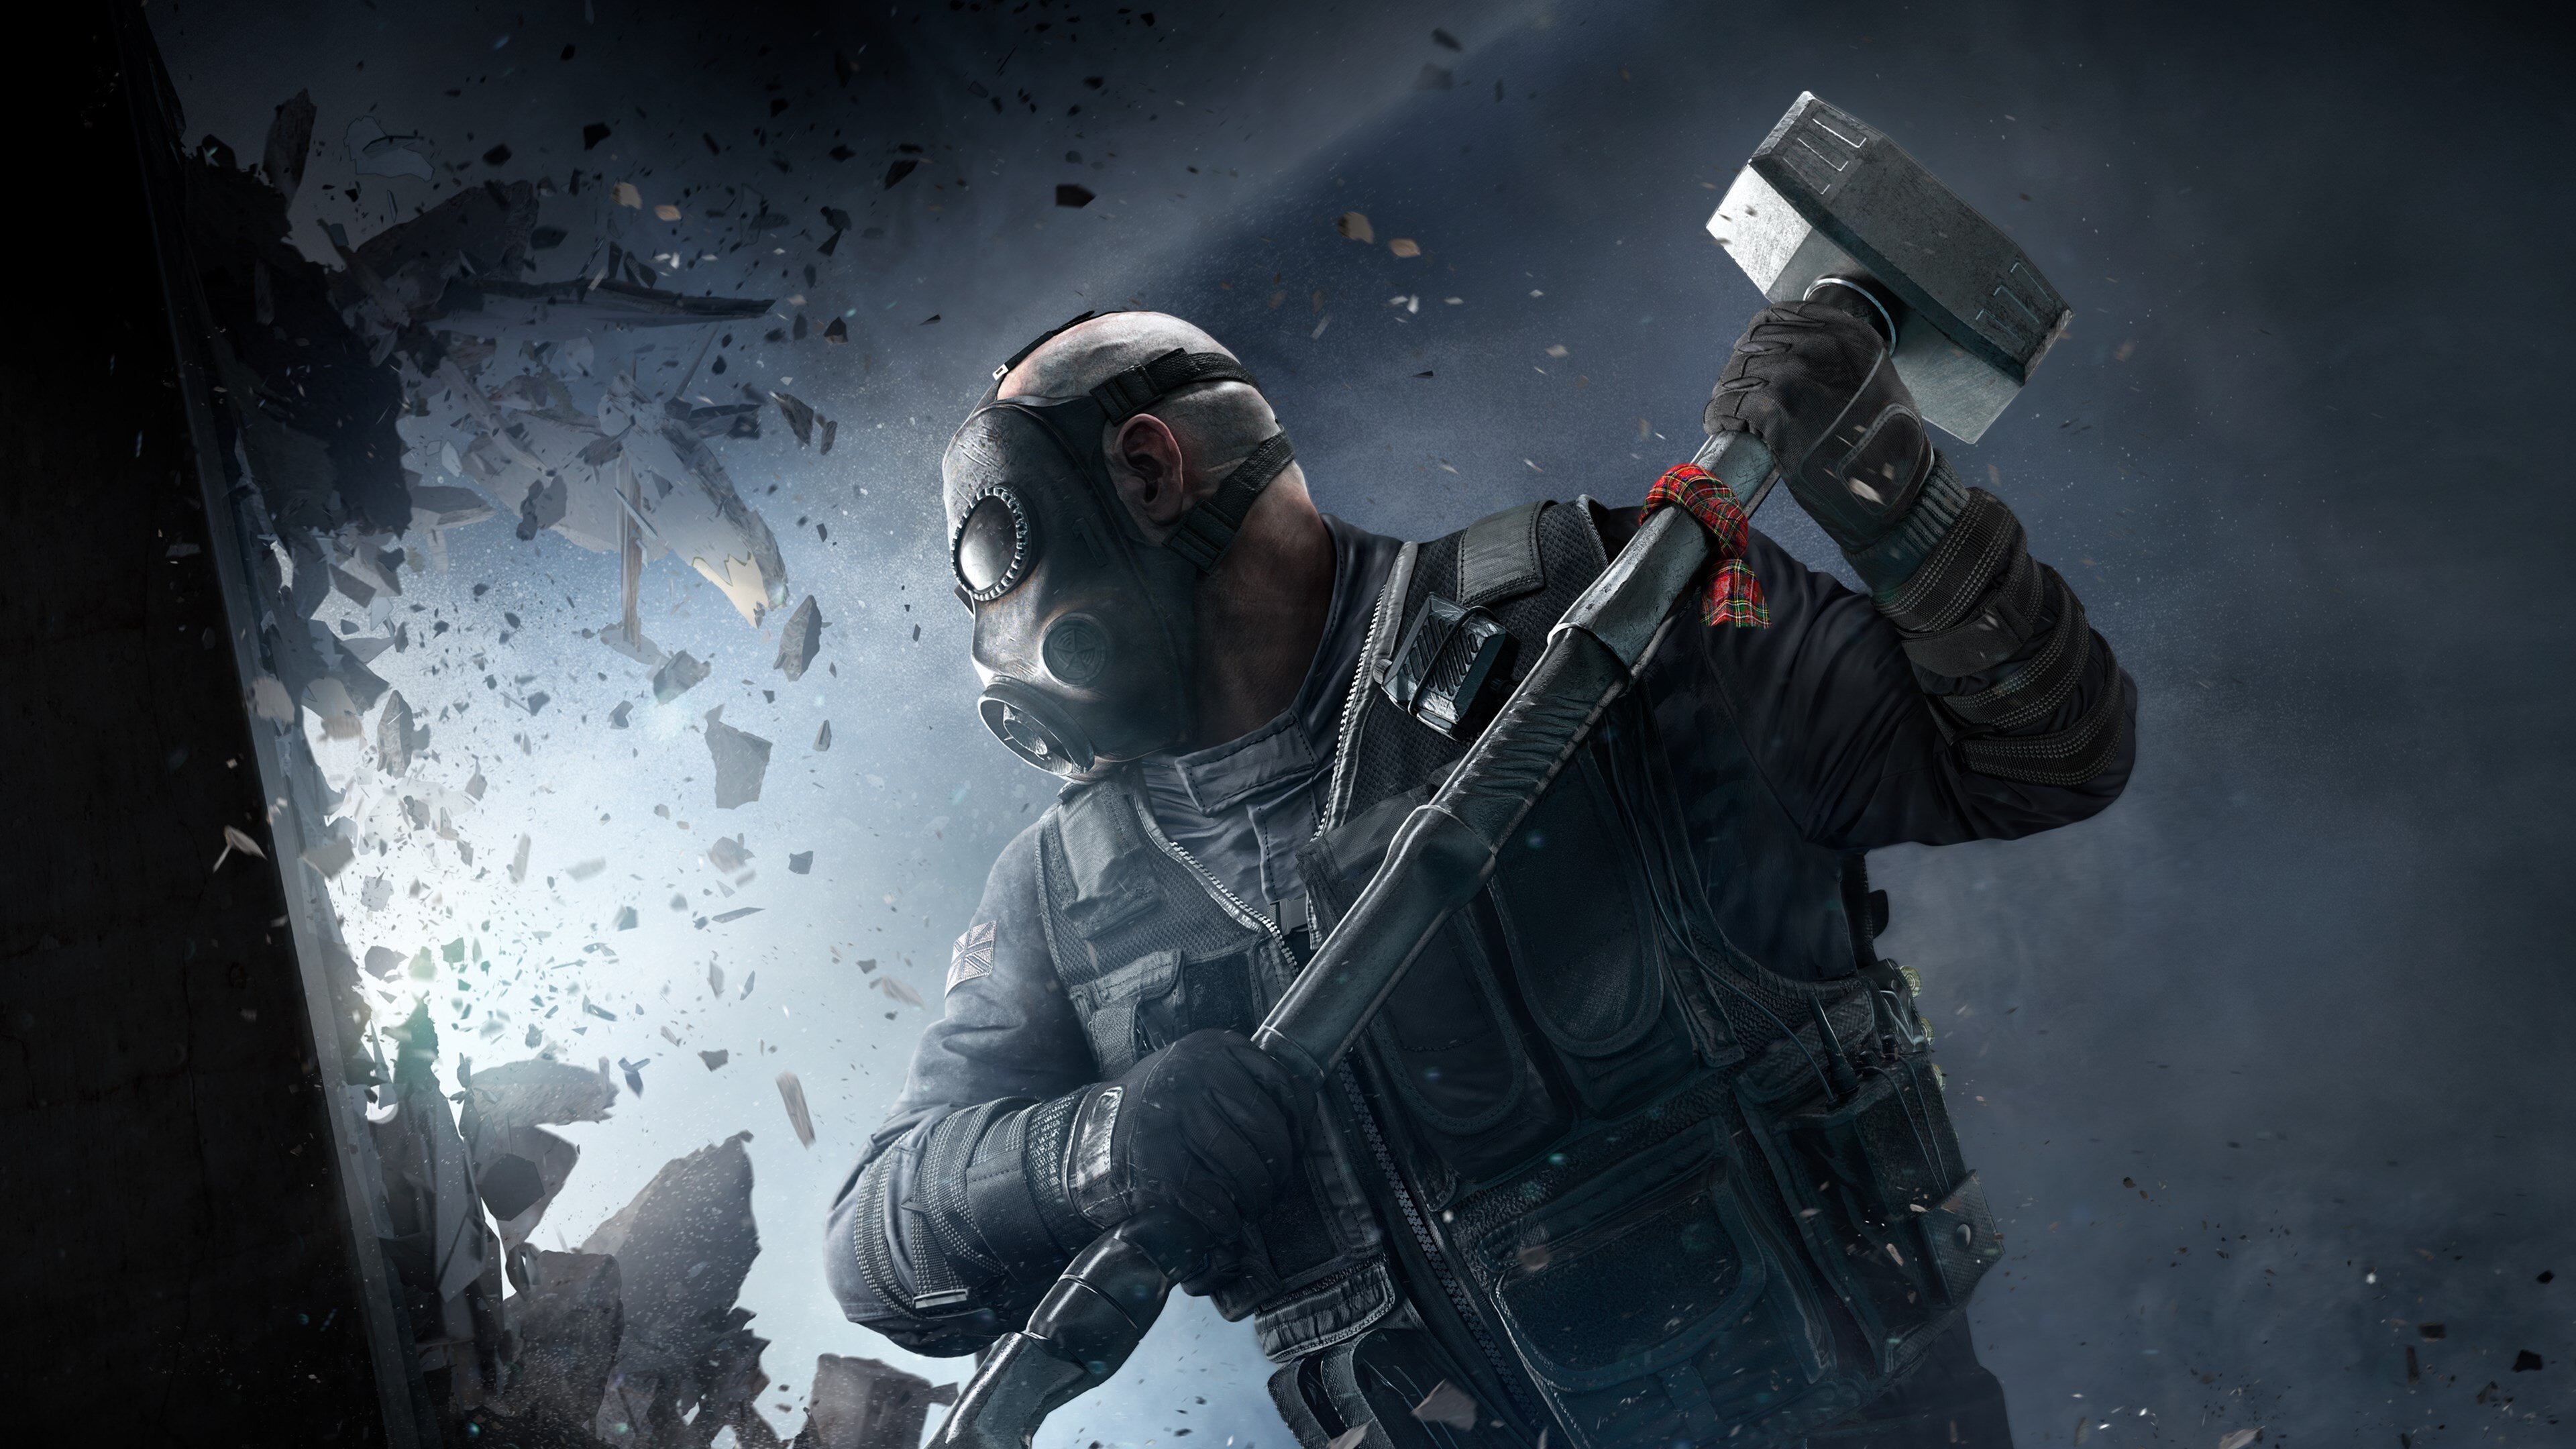 Rainbow Six coming to iOS, player tests coming soon - 9to5Mac